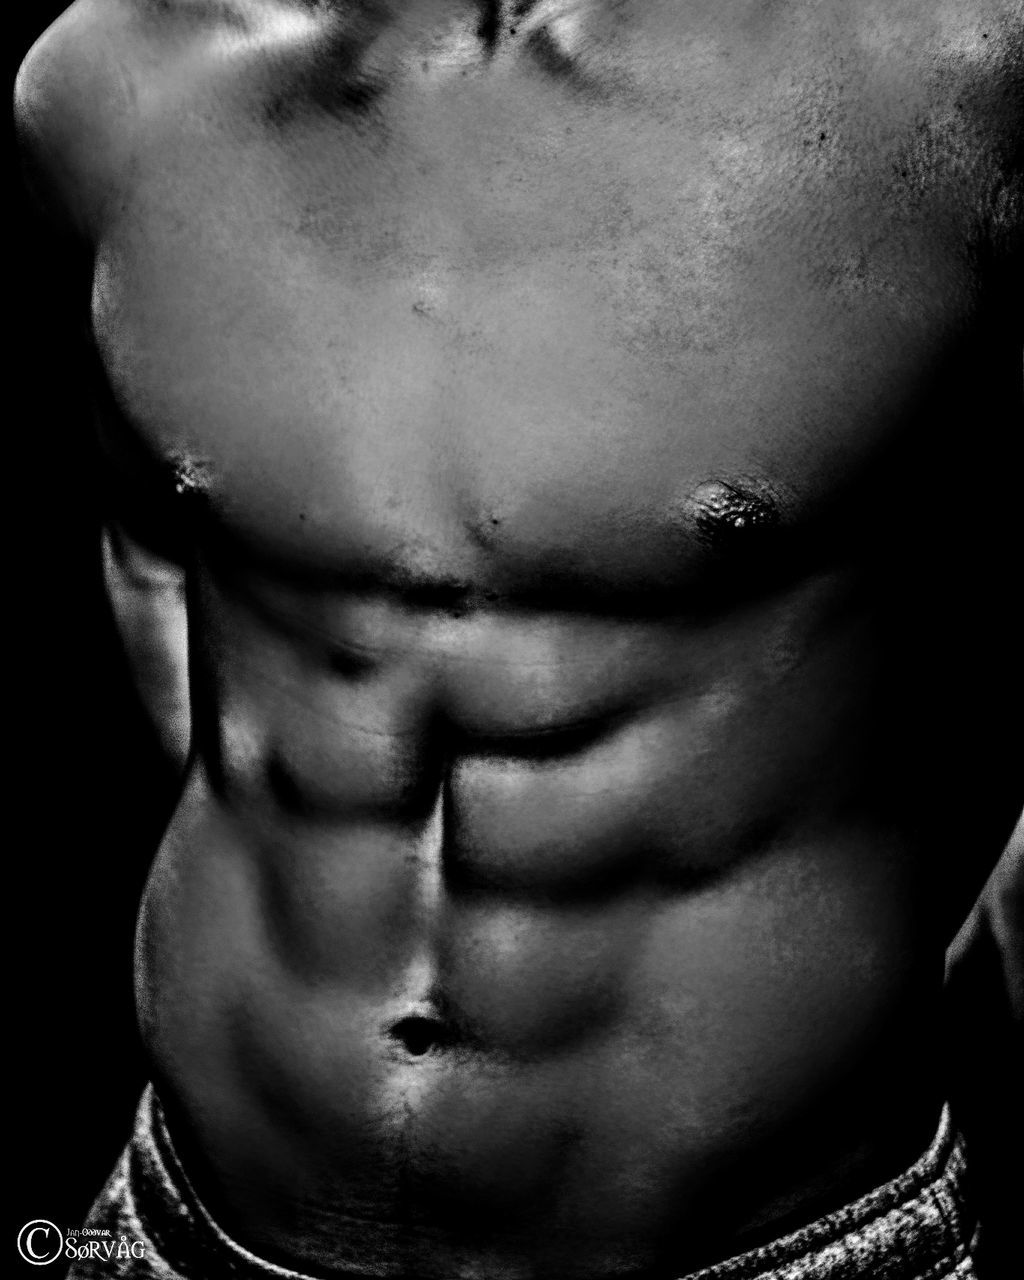 real people, shirtless, one person, men, lifestyles, strength, indoors, black background, close-up, young adult, abdomen, day